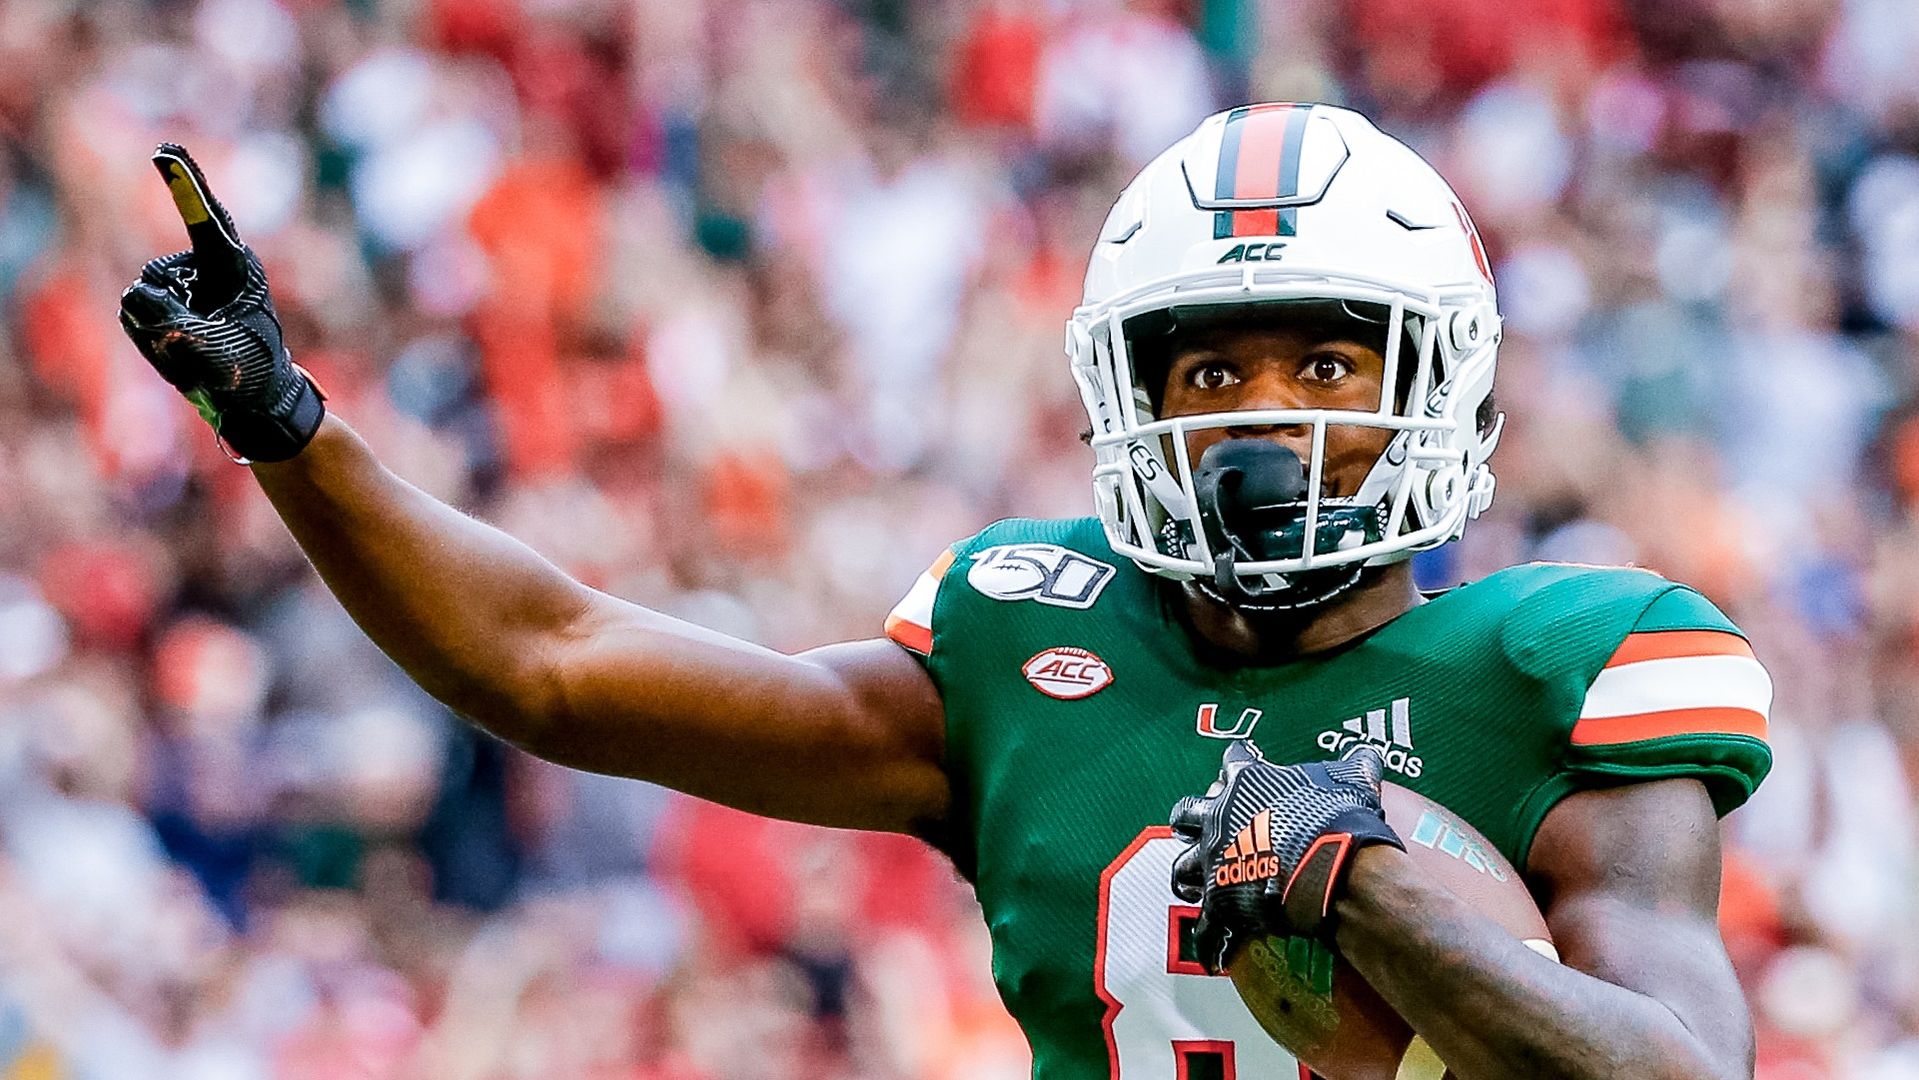 Canes Explode for 52 Points on Senior Day